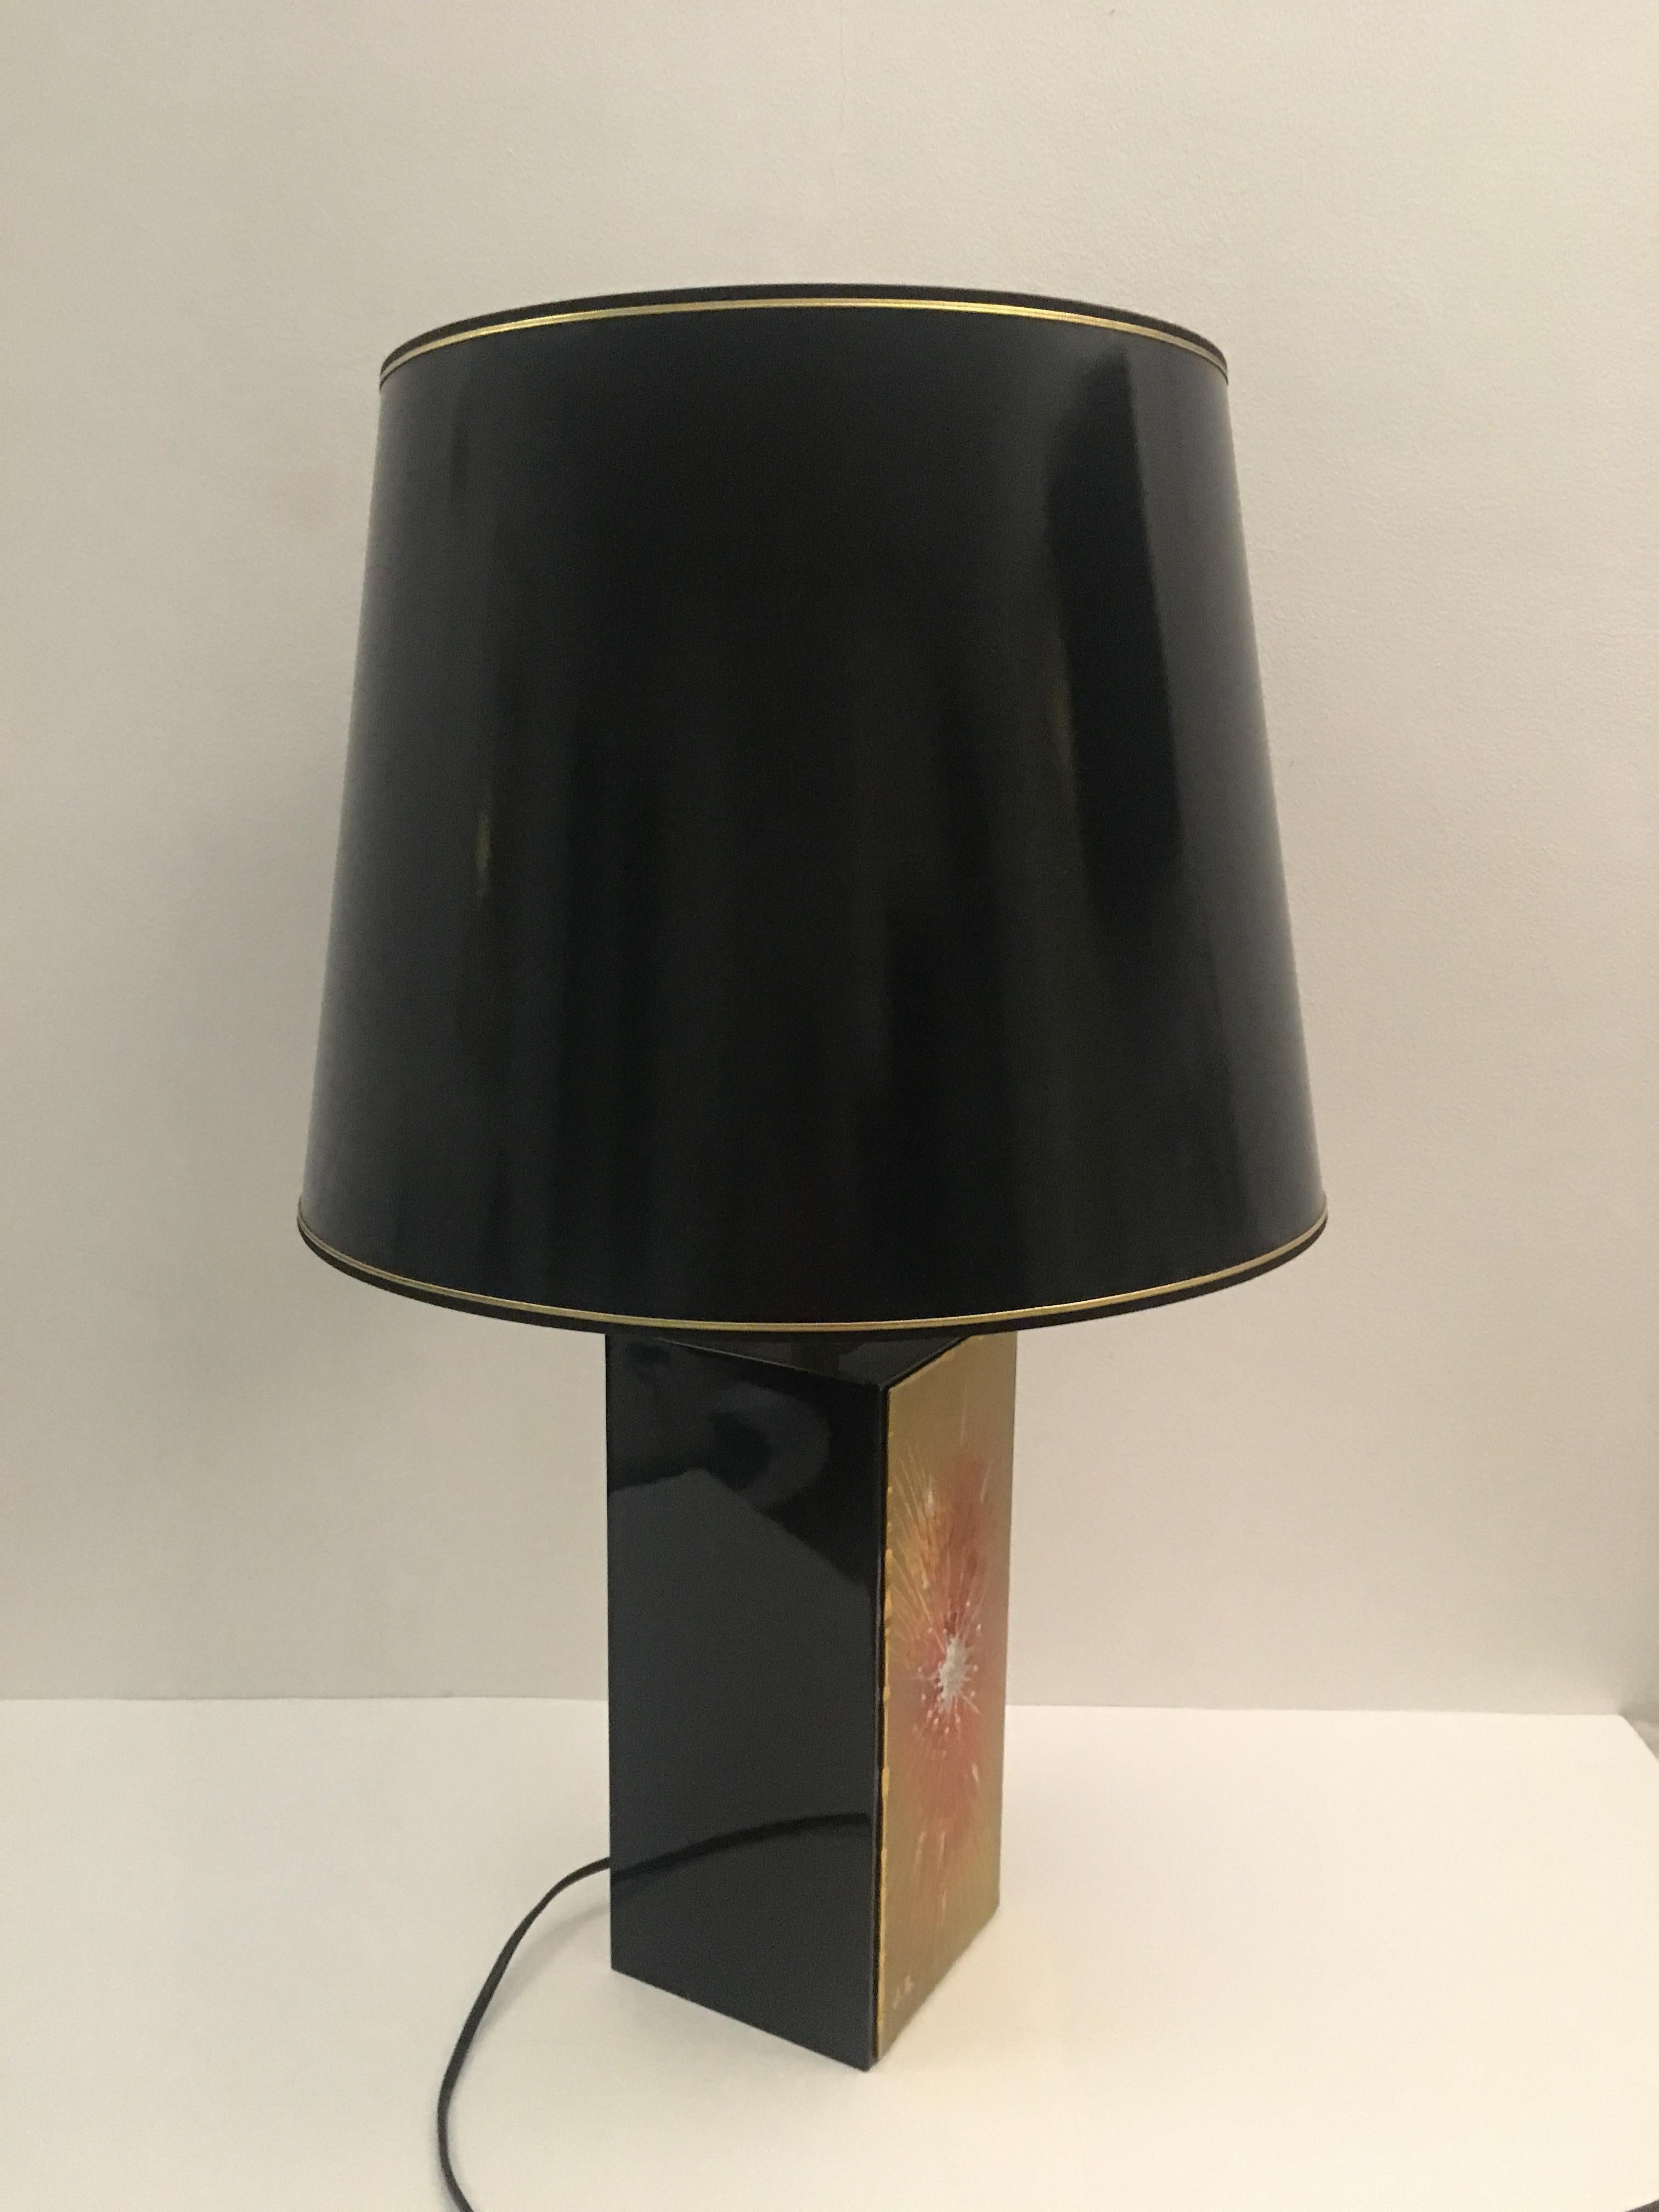 Midcentury table lamp from the 1970s, Signed J.G. and presumably from Vallauris, France. 
The square metal multicolored base combined with the classical shade trimmed in gold has many very attractive details which give this lamp its' modern and